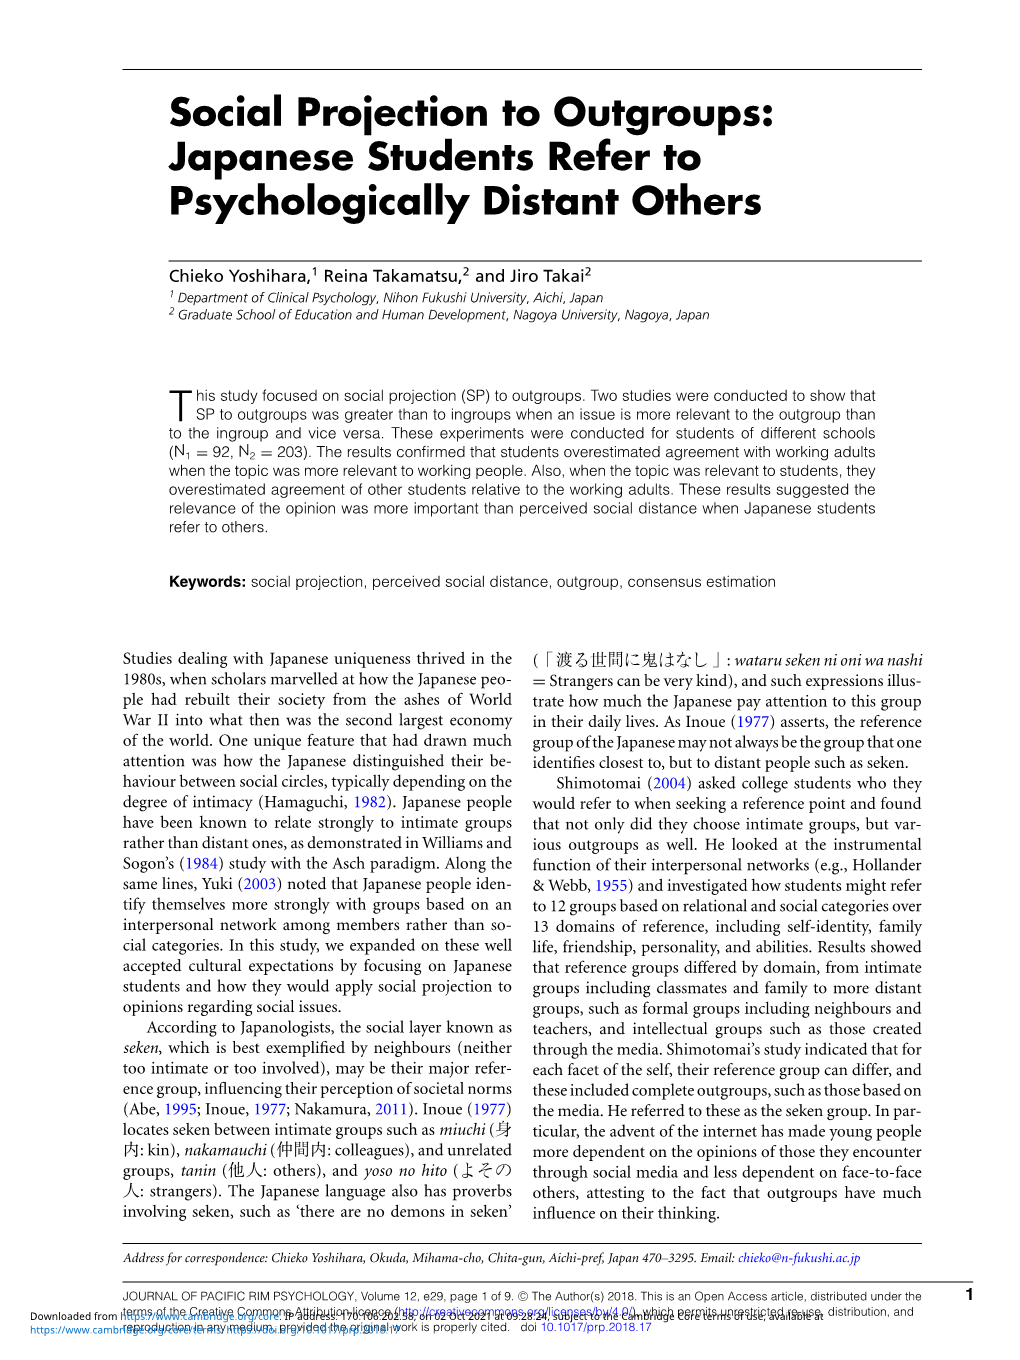 Social Projection to Outgroups: Japanese Students Refer to Psychologically Distant Others